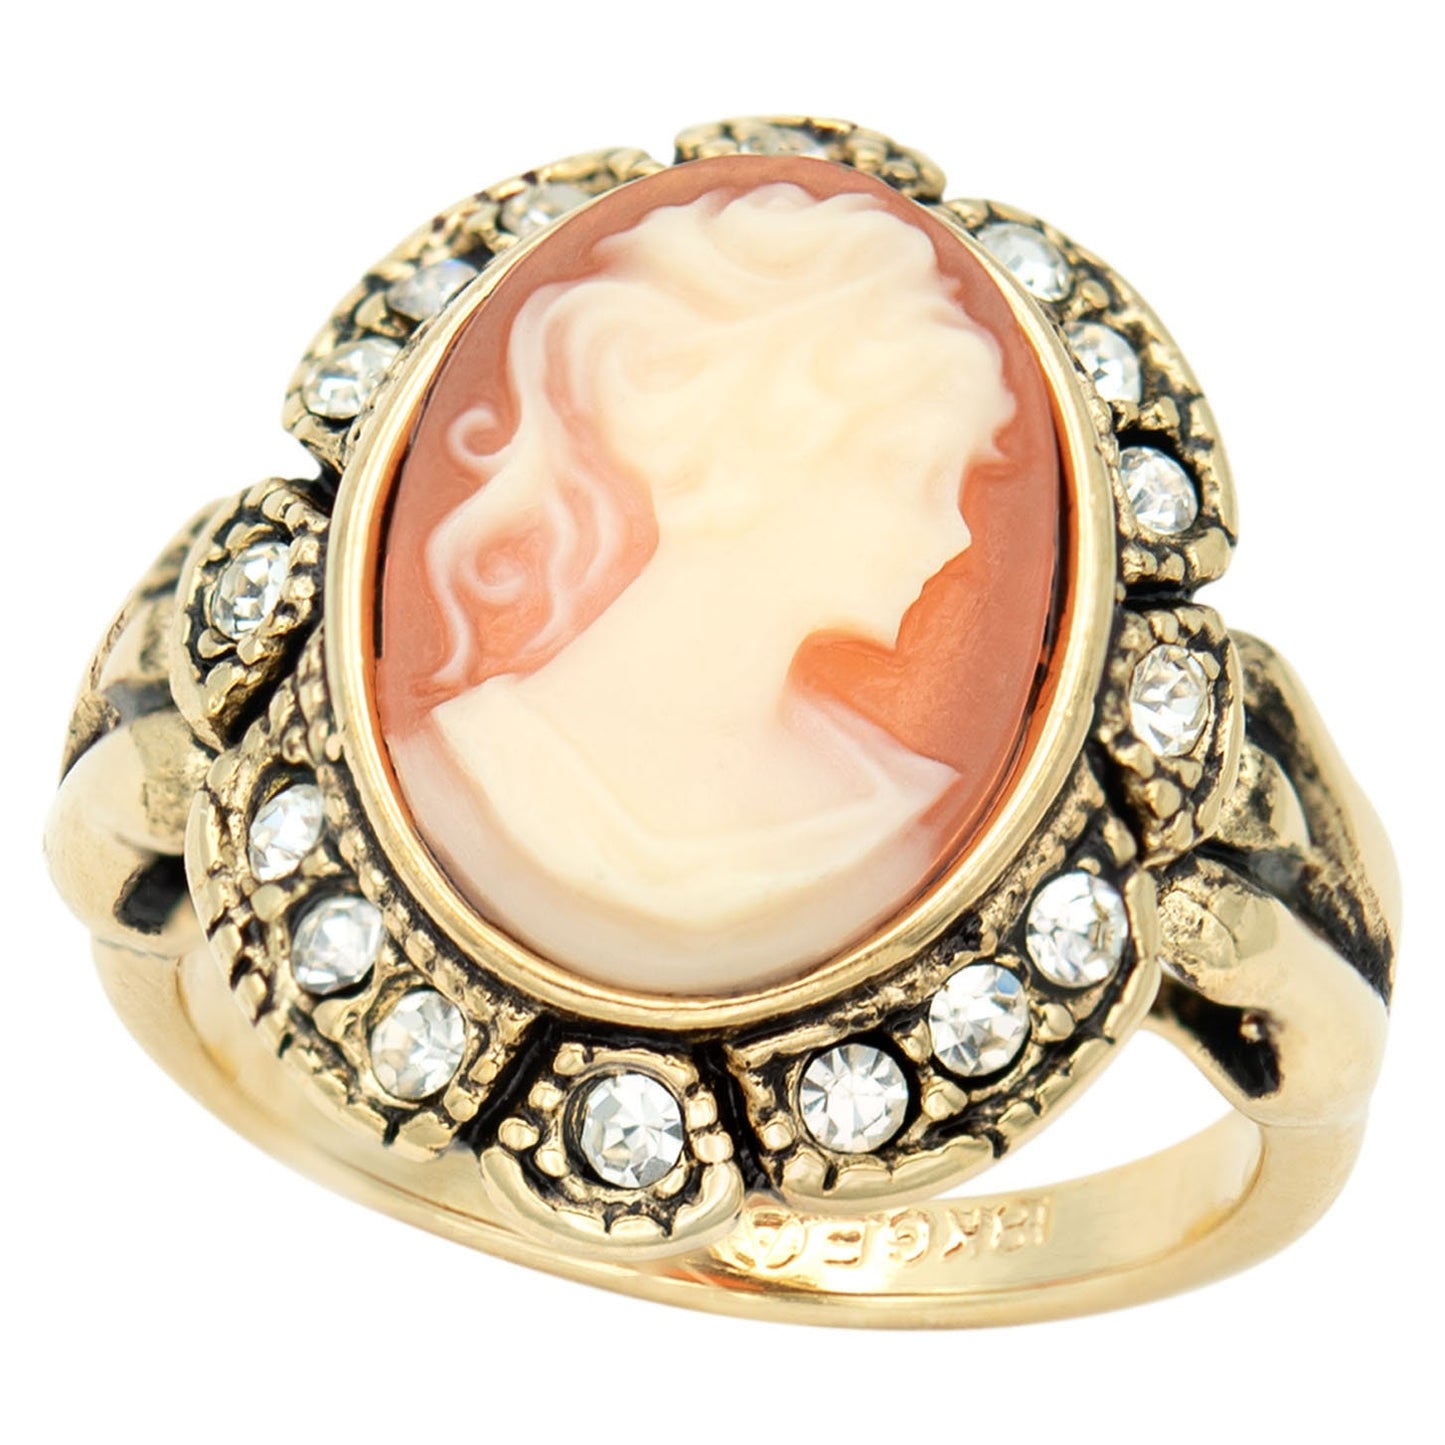 Vintage Ring 1970s 18k Antique Gold Plated White on Coral Cameo Ring Clear Austrian Crystals Womans Costume Handmade Jewelry #R1730